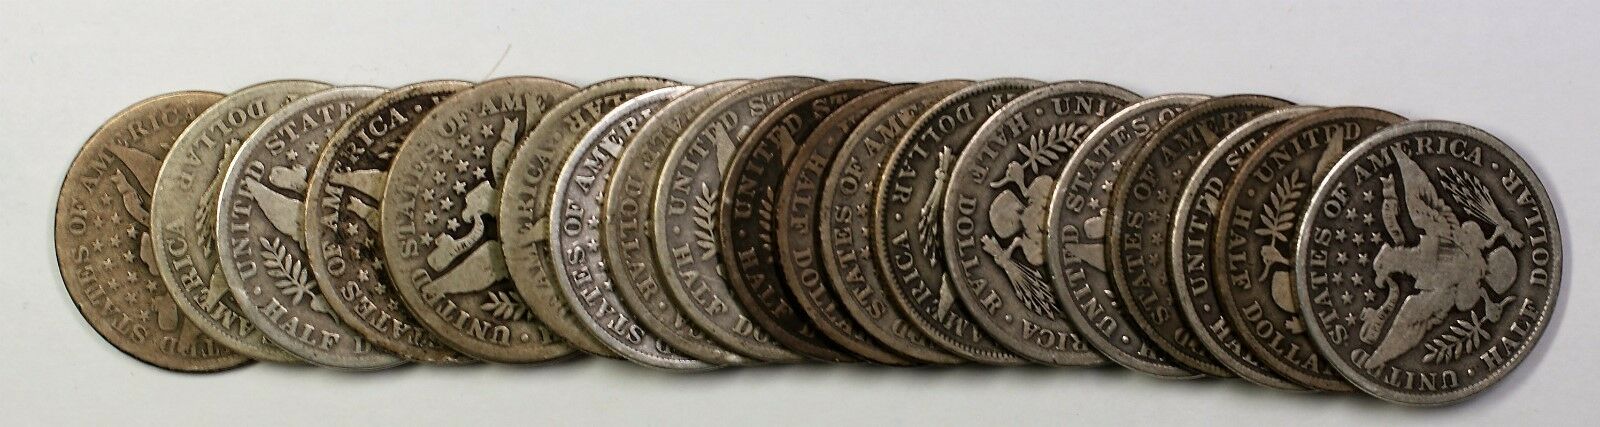 1907-O Barber Half Dollar 50c Roll 20 Circulated 90% Old Silver Coins Lot